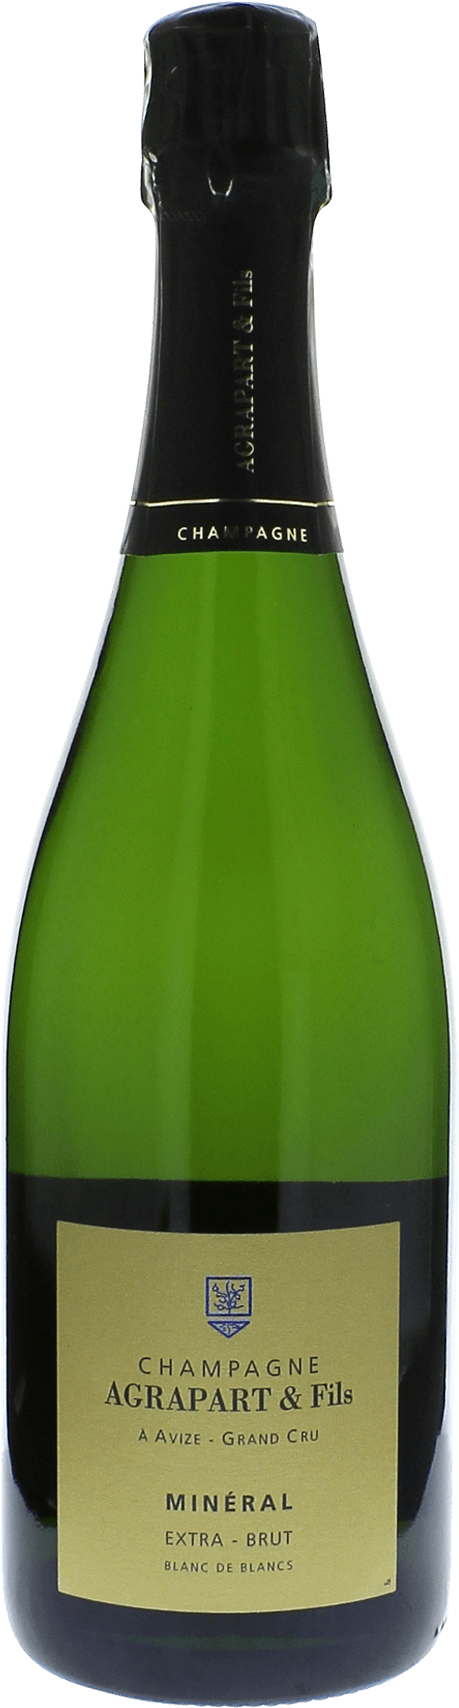 Agrapart  mineral extra brut blanc de blancs grand cru 2013  Agrapart & Fils, Champagne